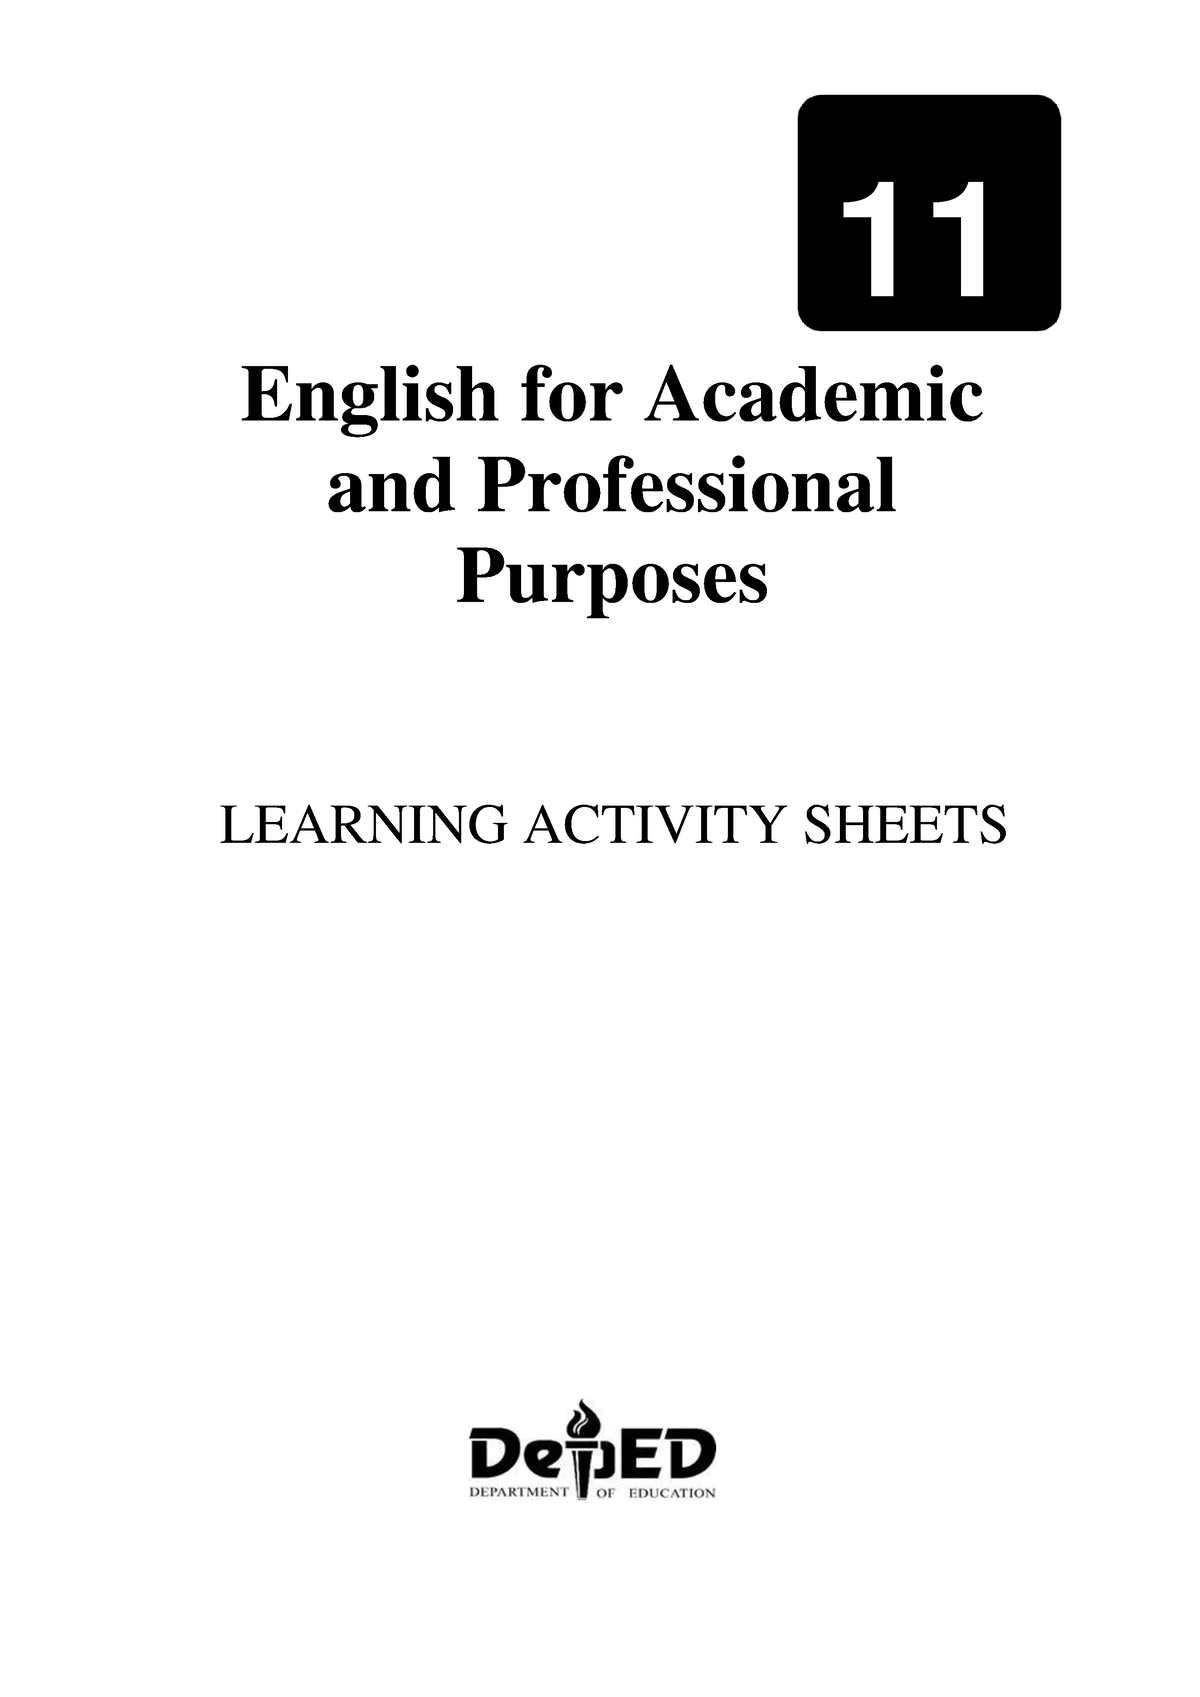 Eapp Q2 Las Eapp Q2 Las 11 English For Academic And Professional Purposes Learning Activity 1511